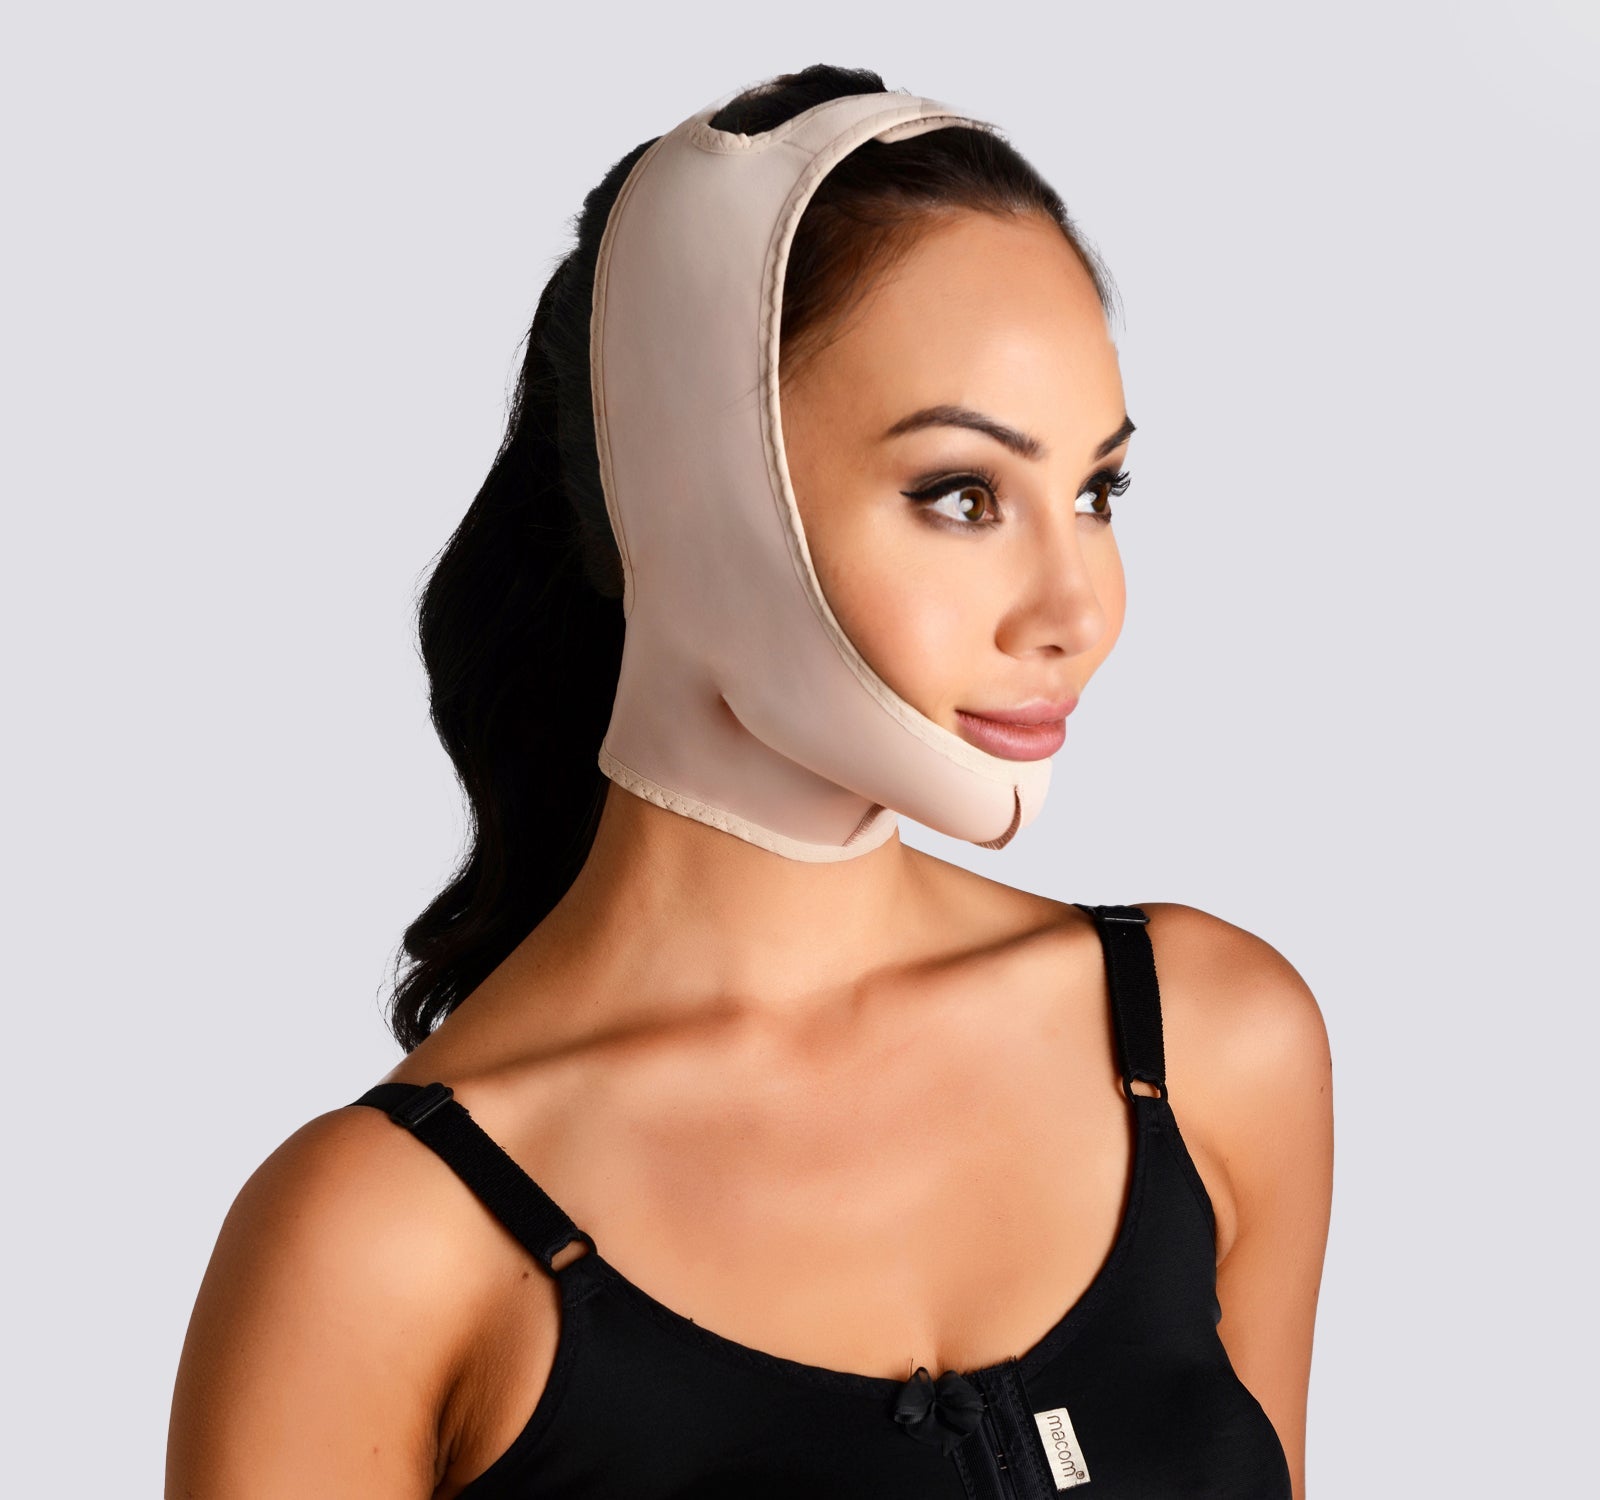 Post Facial Surgery Chin Strap Compression Garment with Full Neck Support –